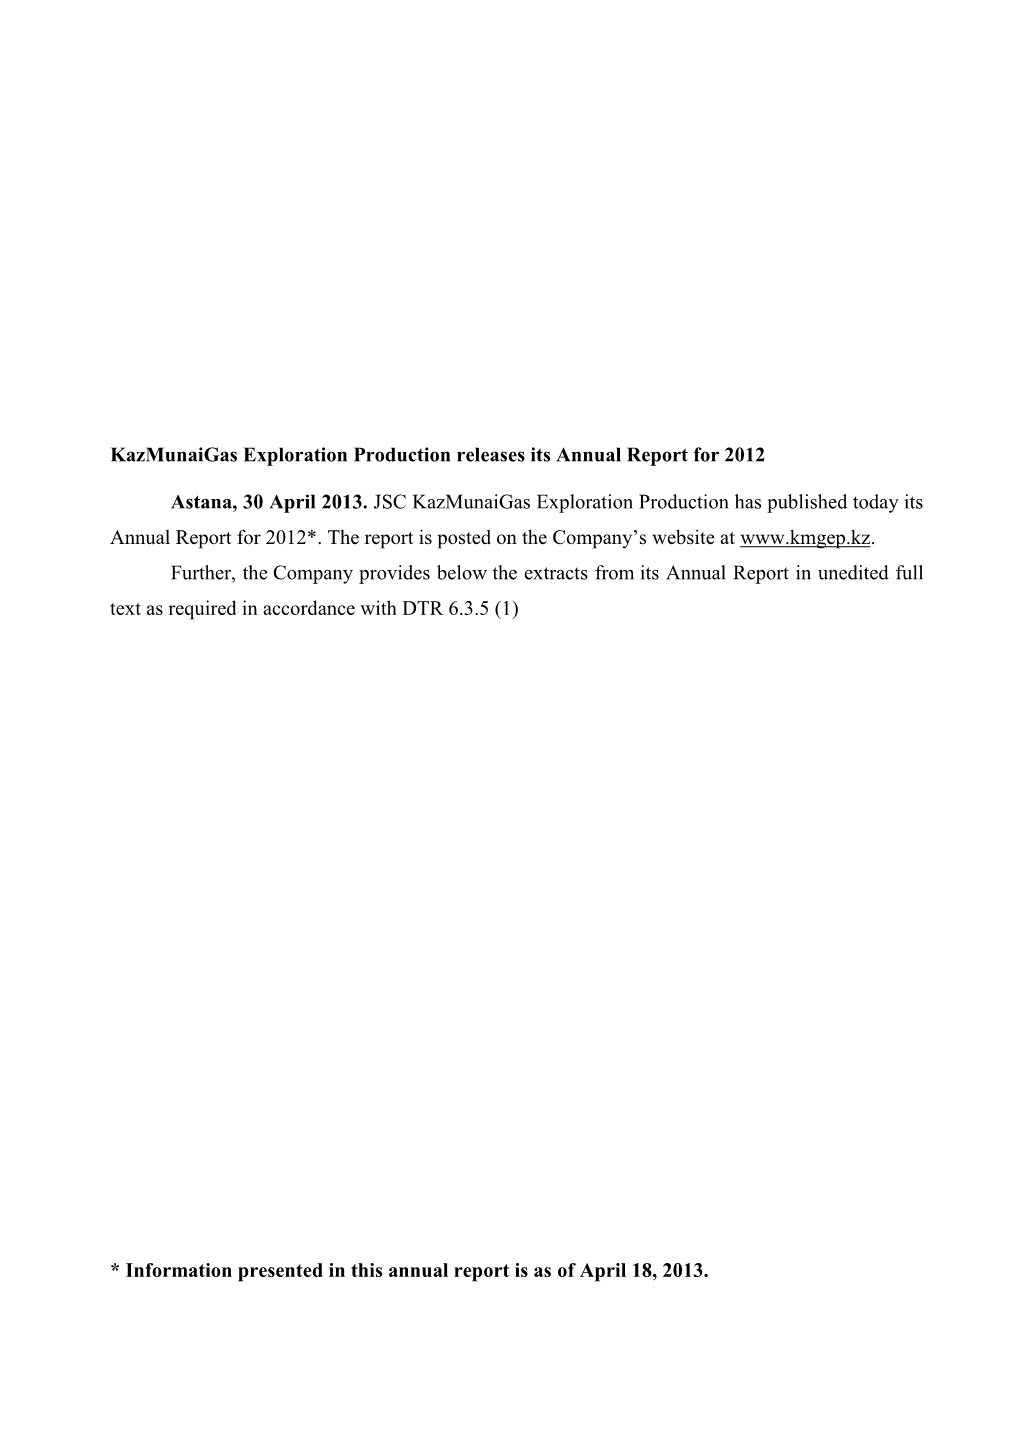 Kazmunaigas Exploration Production Releases Its Annual Report for 2012